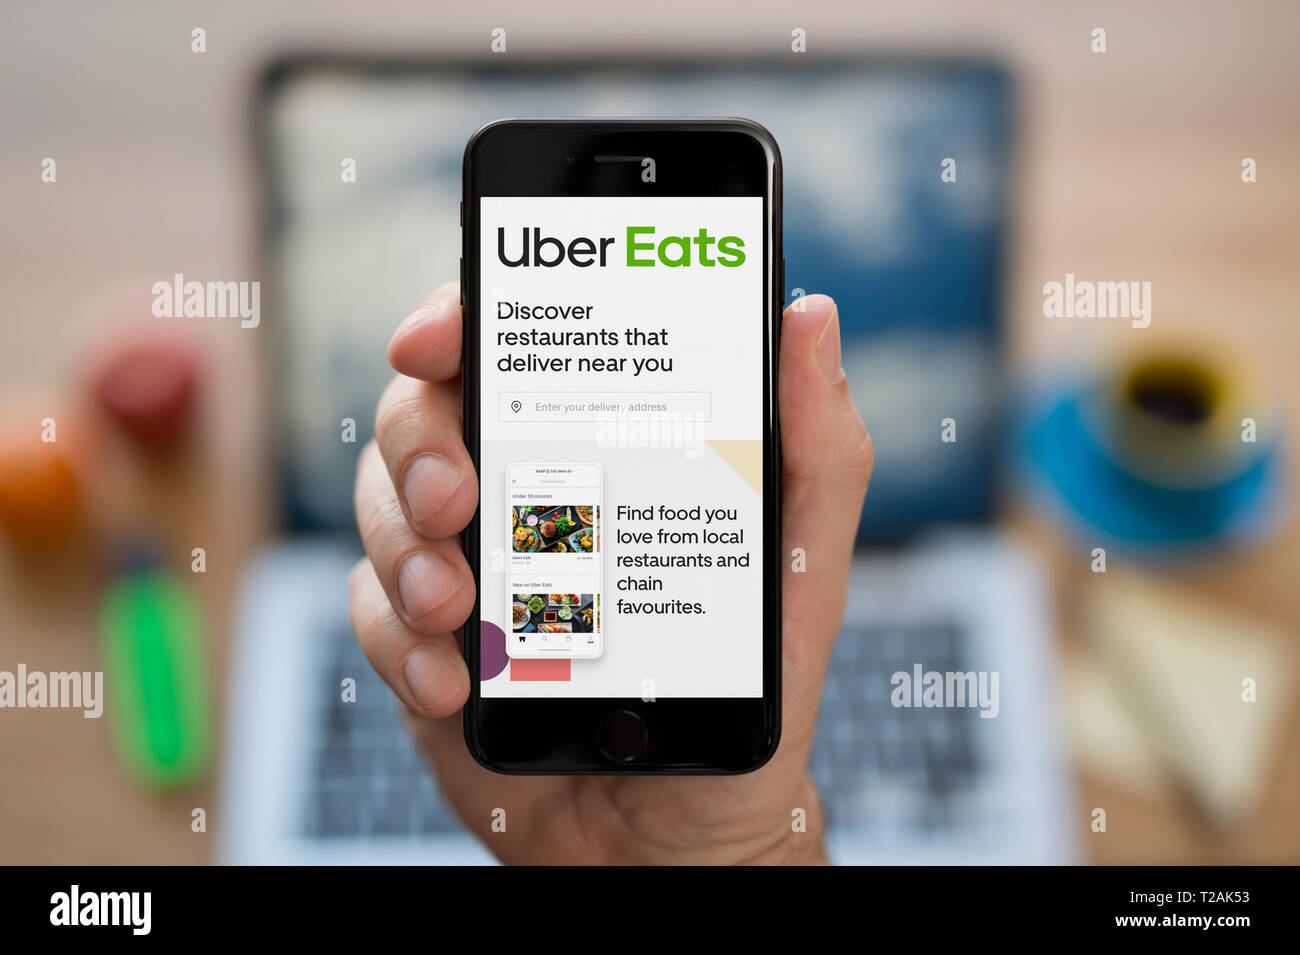 A man looks at his iPhone which displays the Uber Eats logo (Editorial use only). Stock Photo